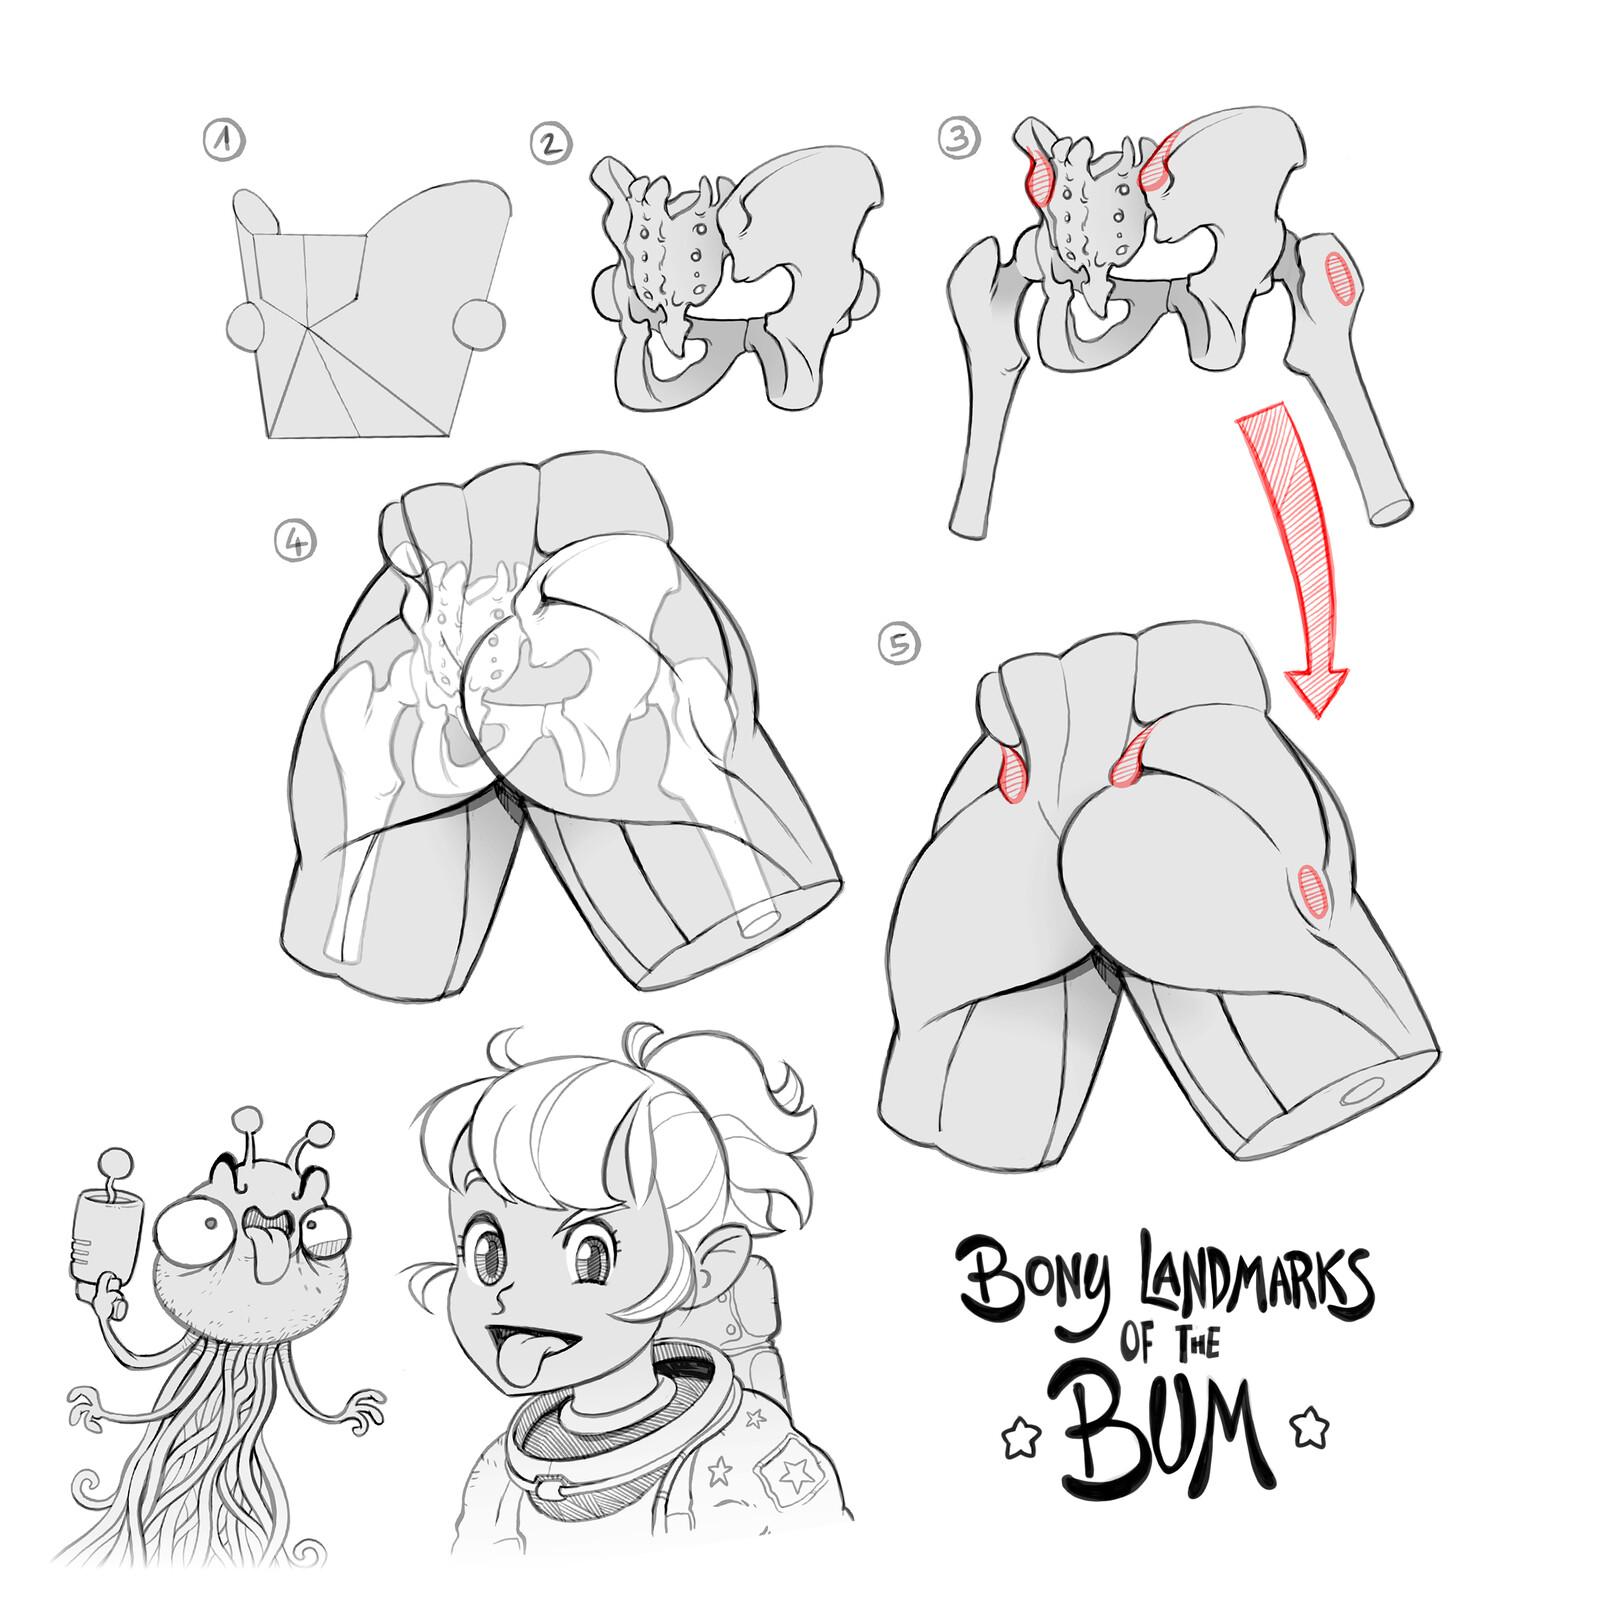 How to draw a bum and its bony landmarks